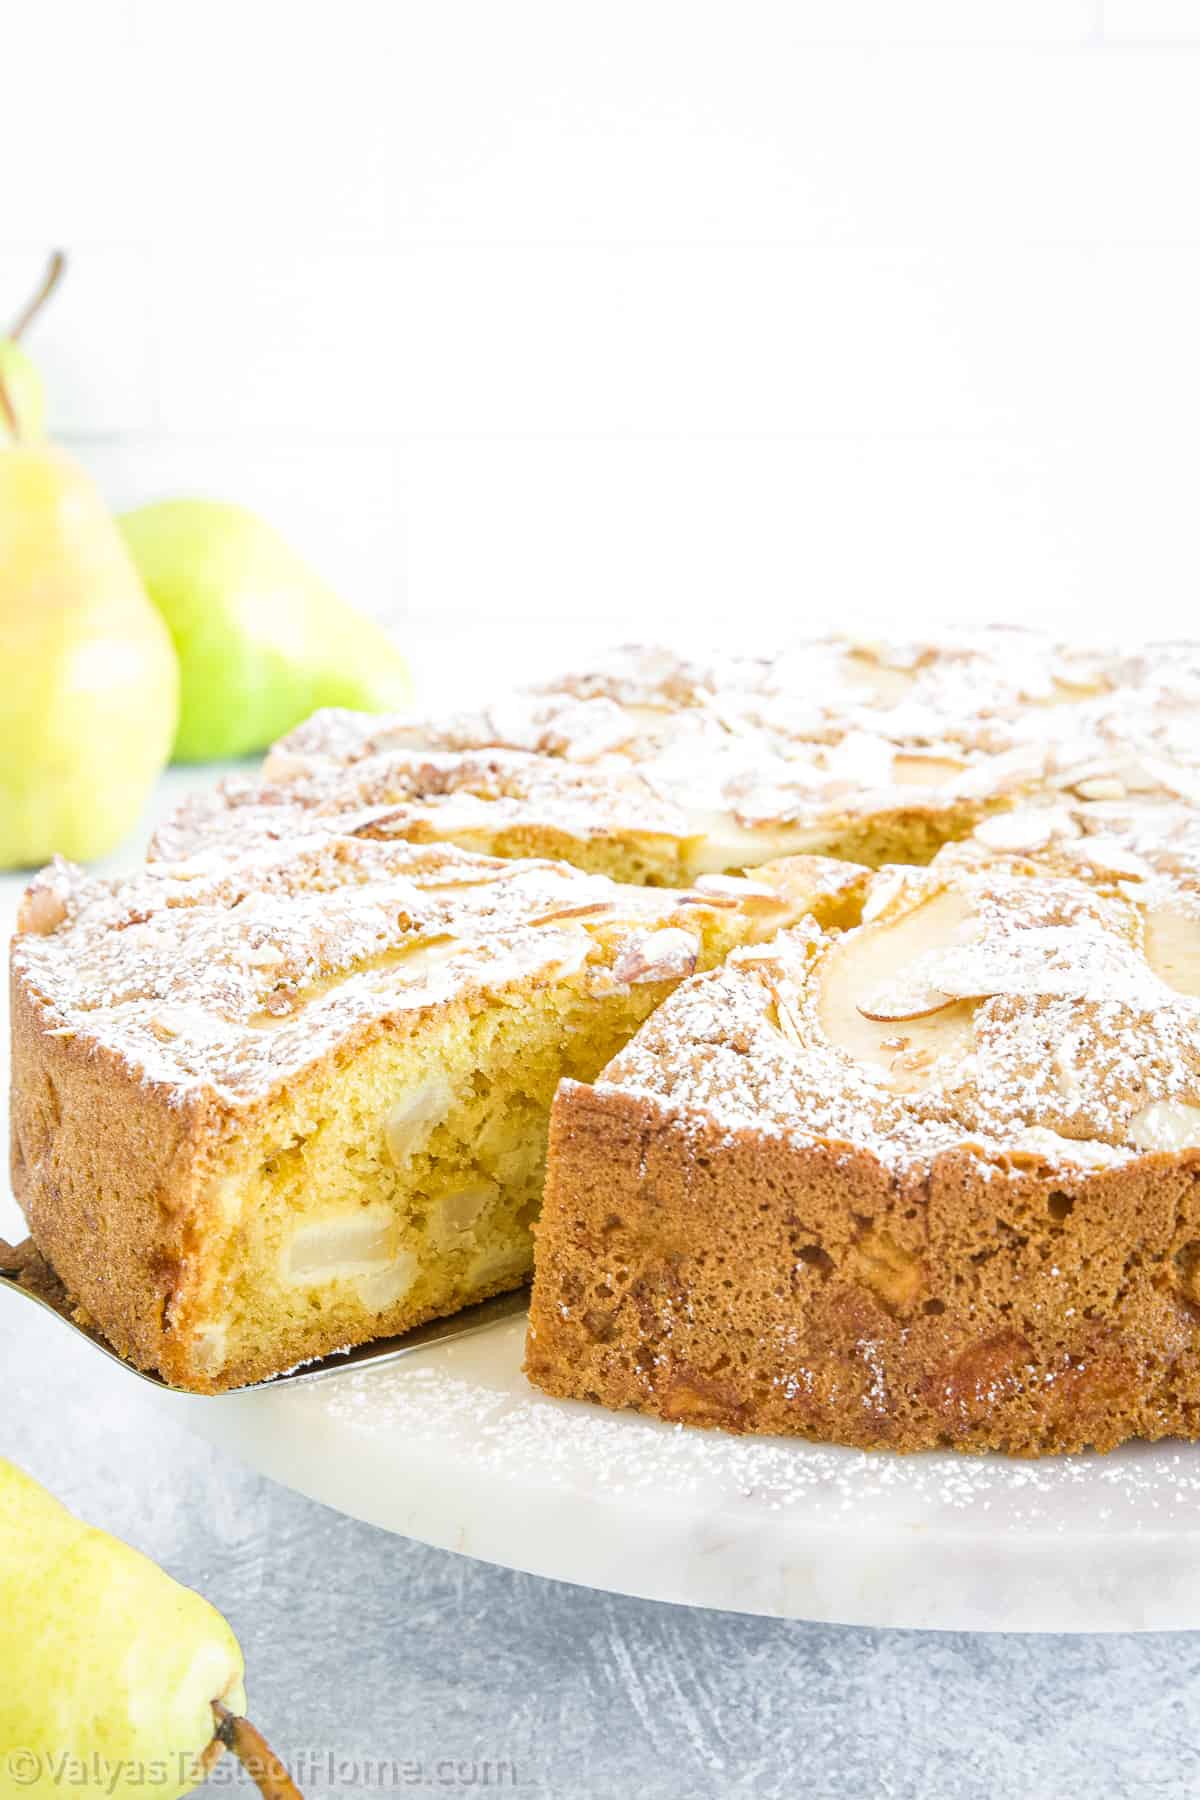 This Almond Coffee Cake is an all-time favorite dessert that combines the rich, buttery flavor of cake batter with the crunch of sliced almonds, resulting in a treat that’s simply irresistible.